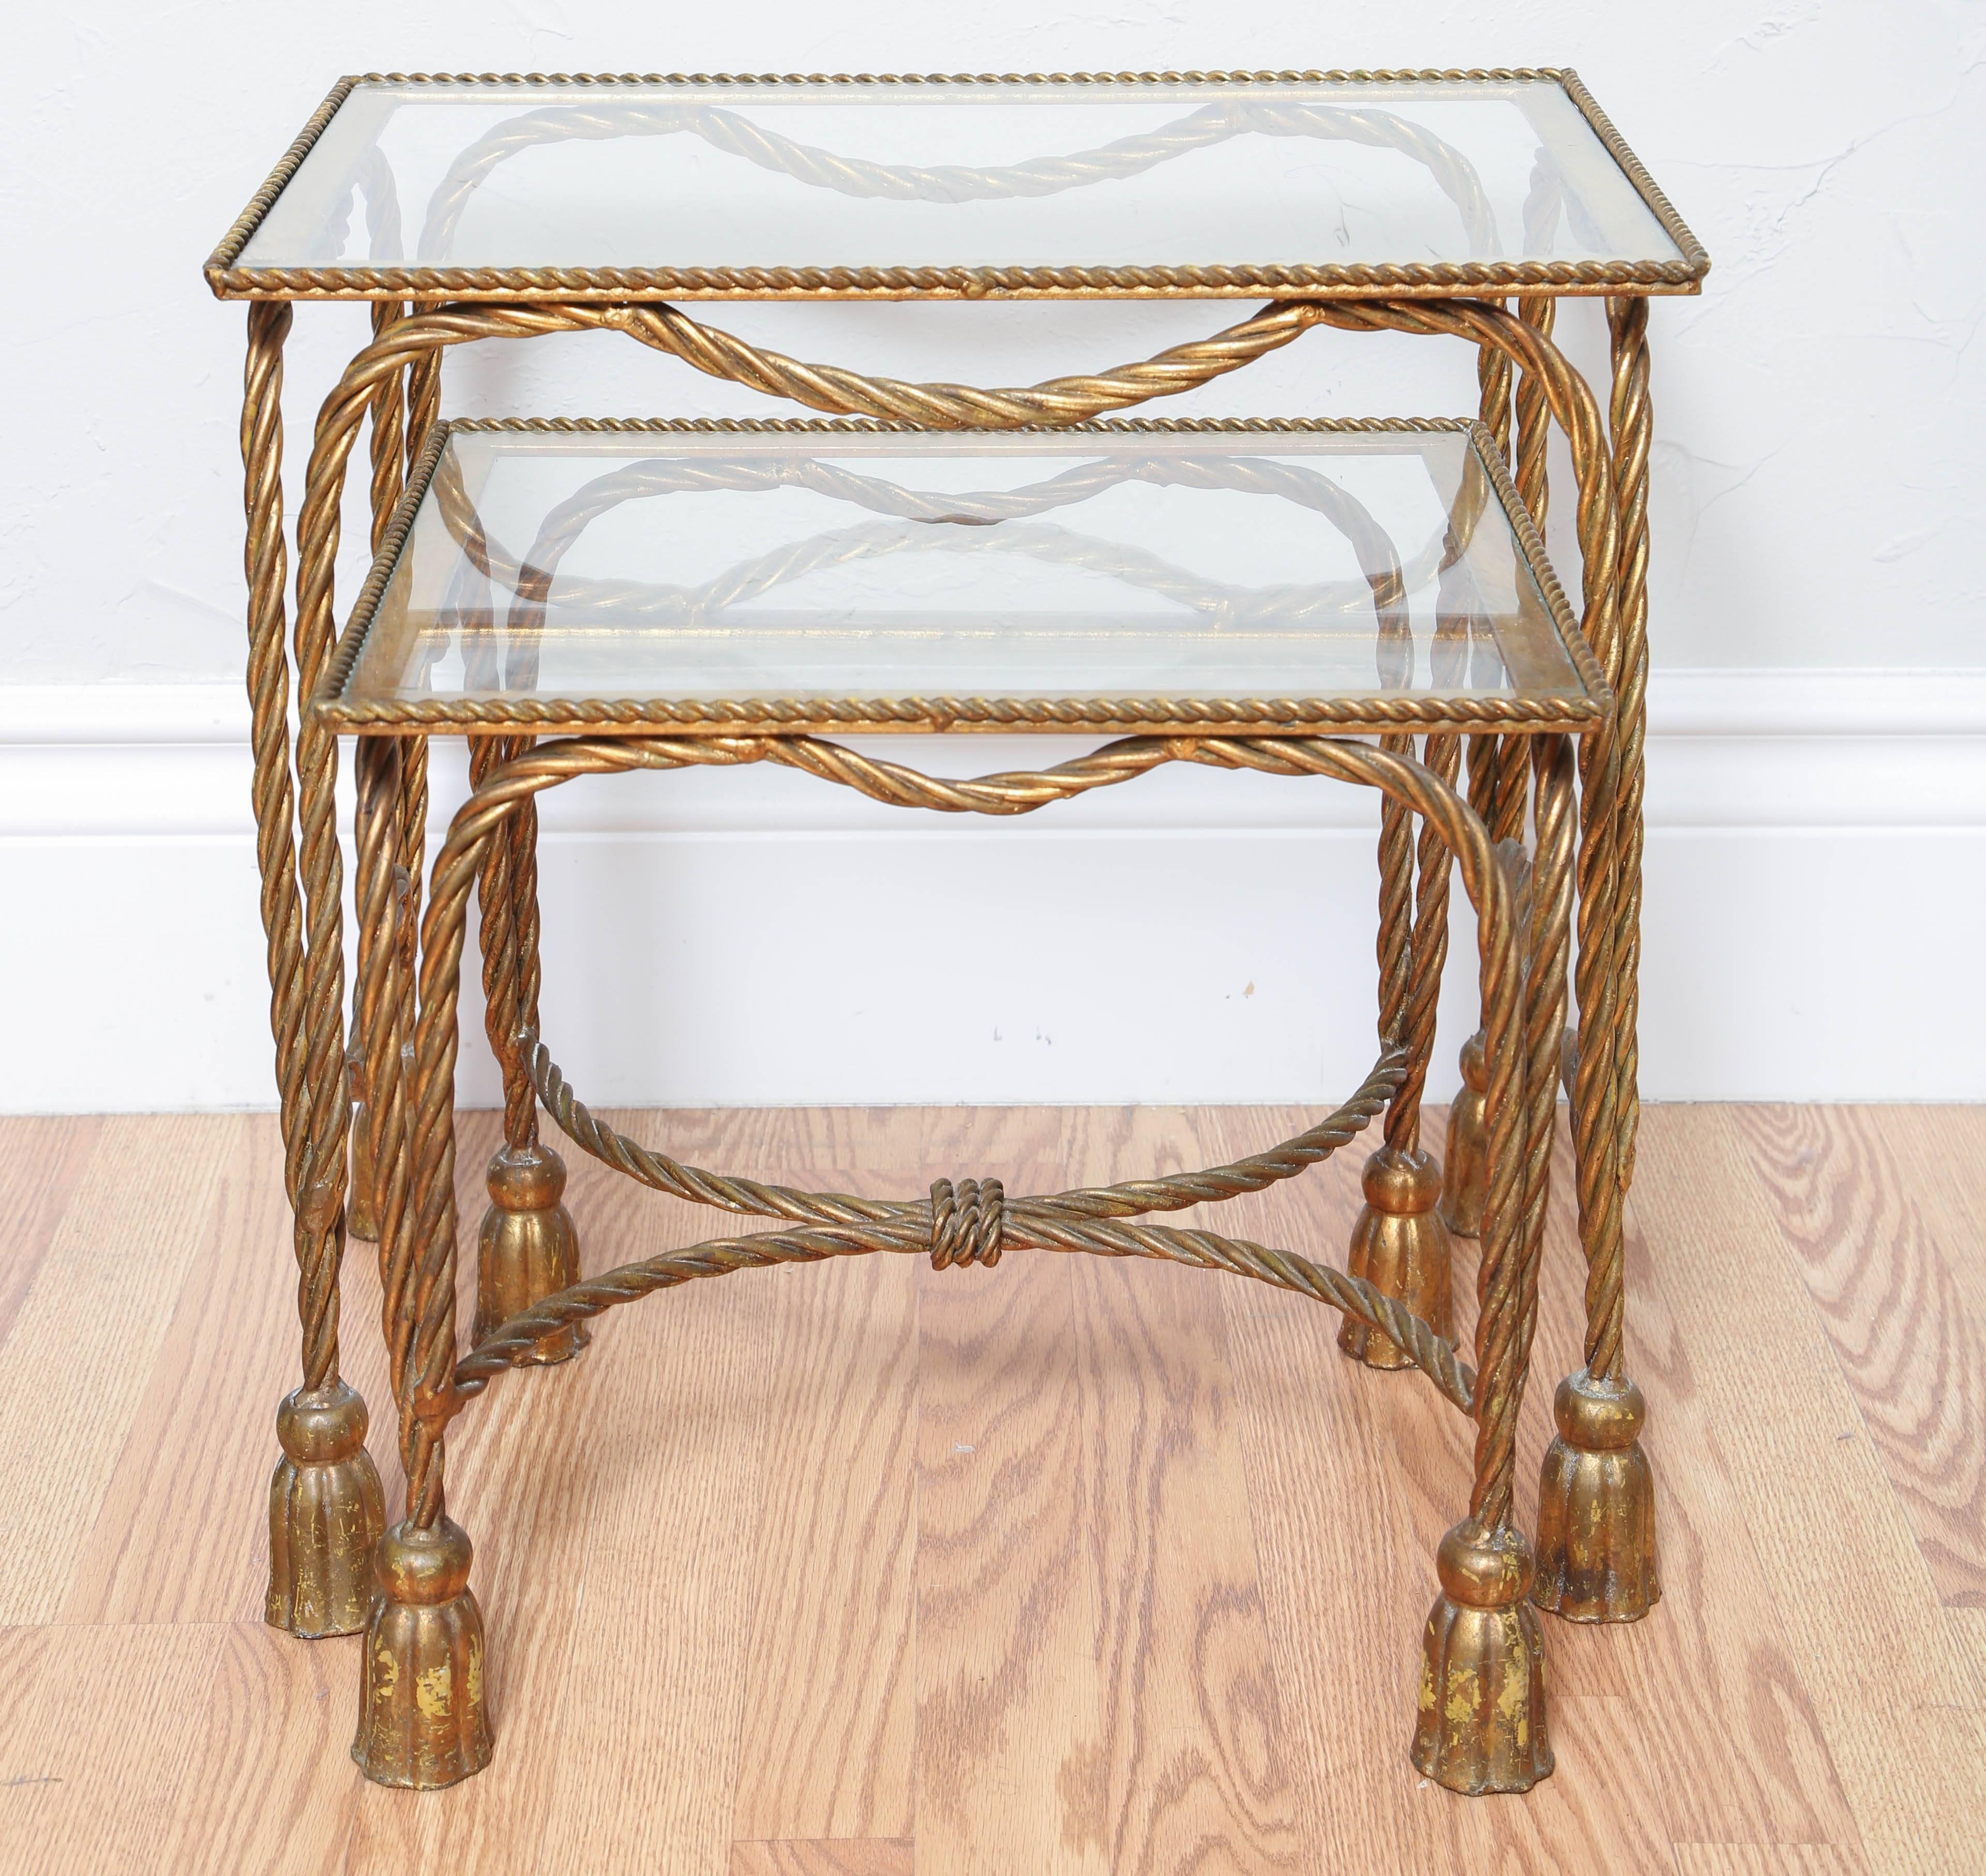 Italian gilt metal stacking tables in the twisted rope and tassel motif.